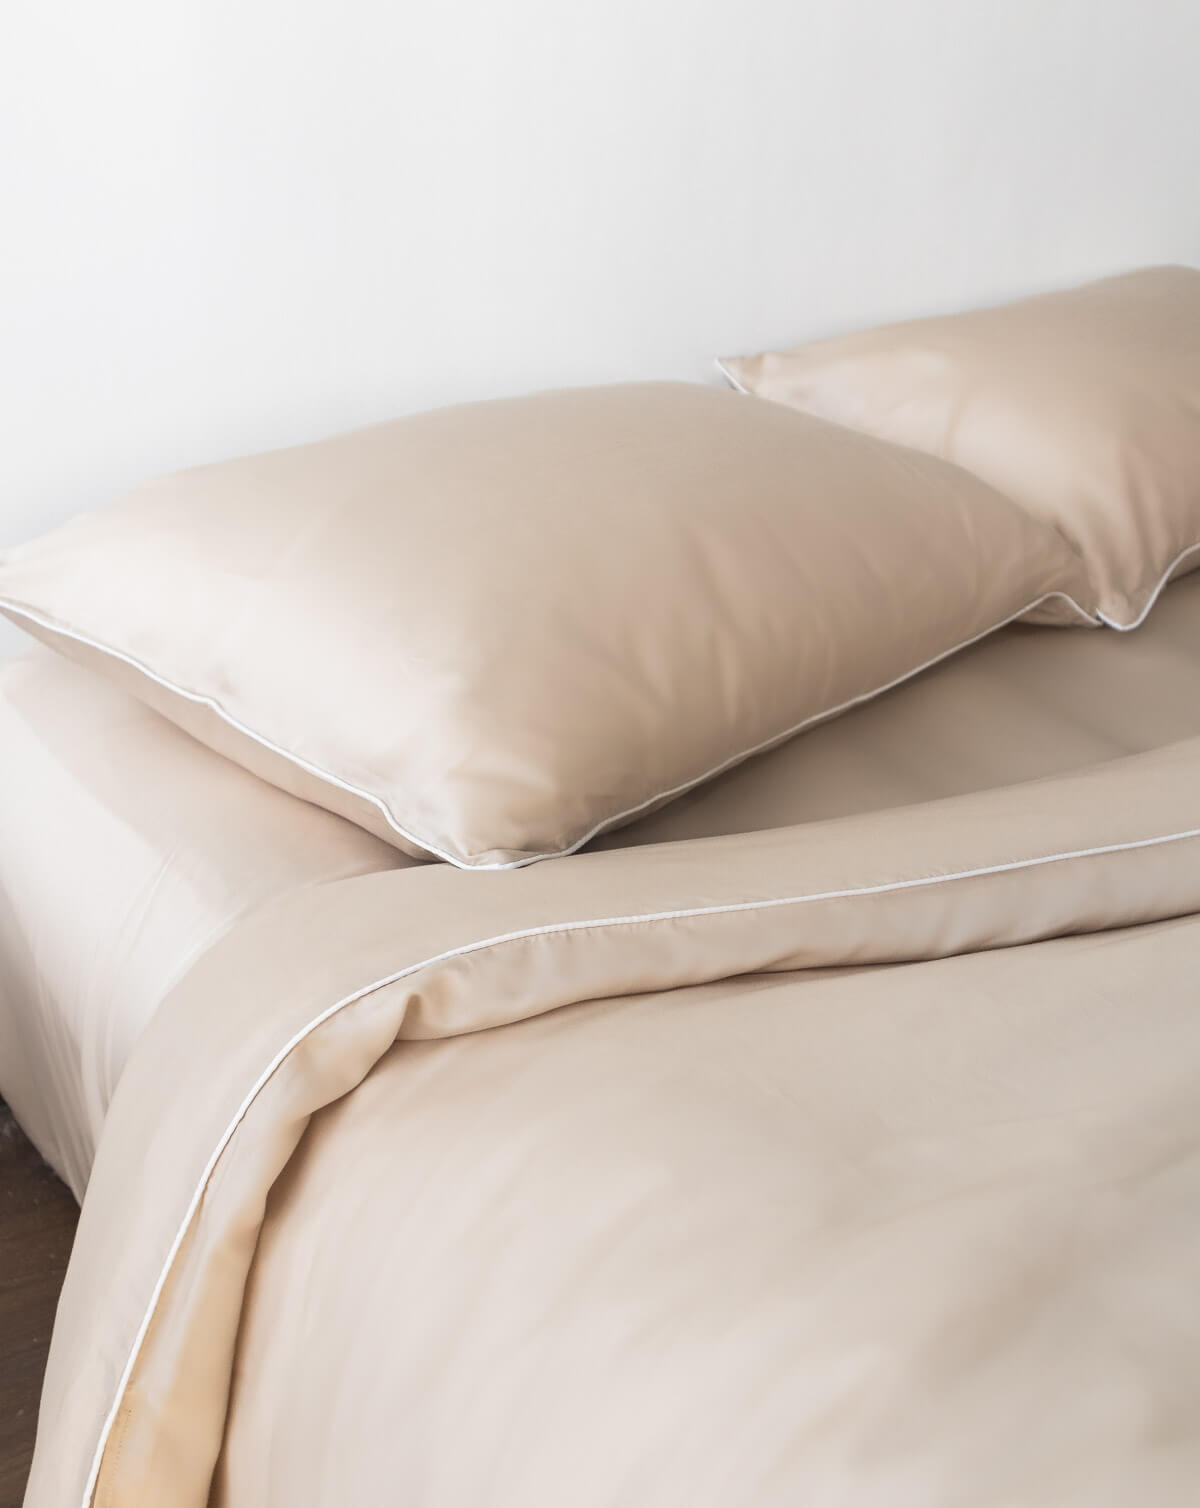 ava and ava ph organic bamboo lyocell duvet cover sheet set pillowcases in sand beige with white piping. soft and cooling bedding sheets.